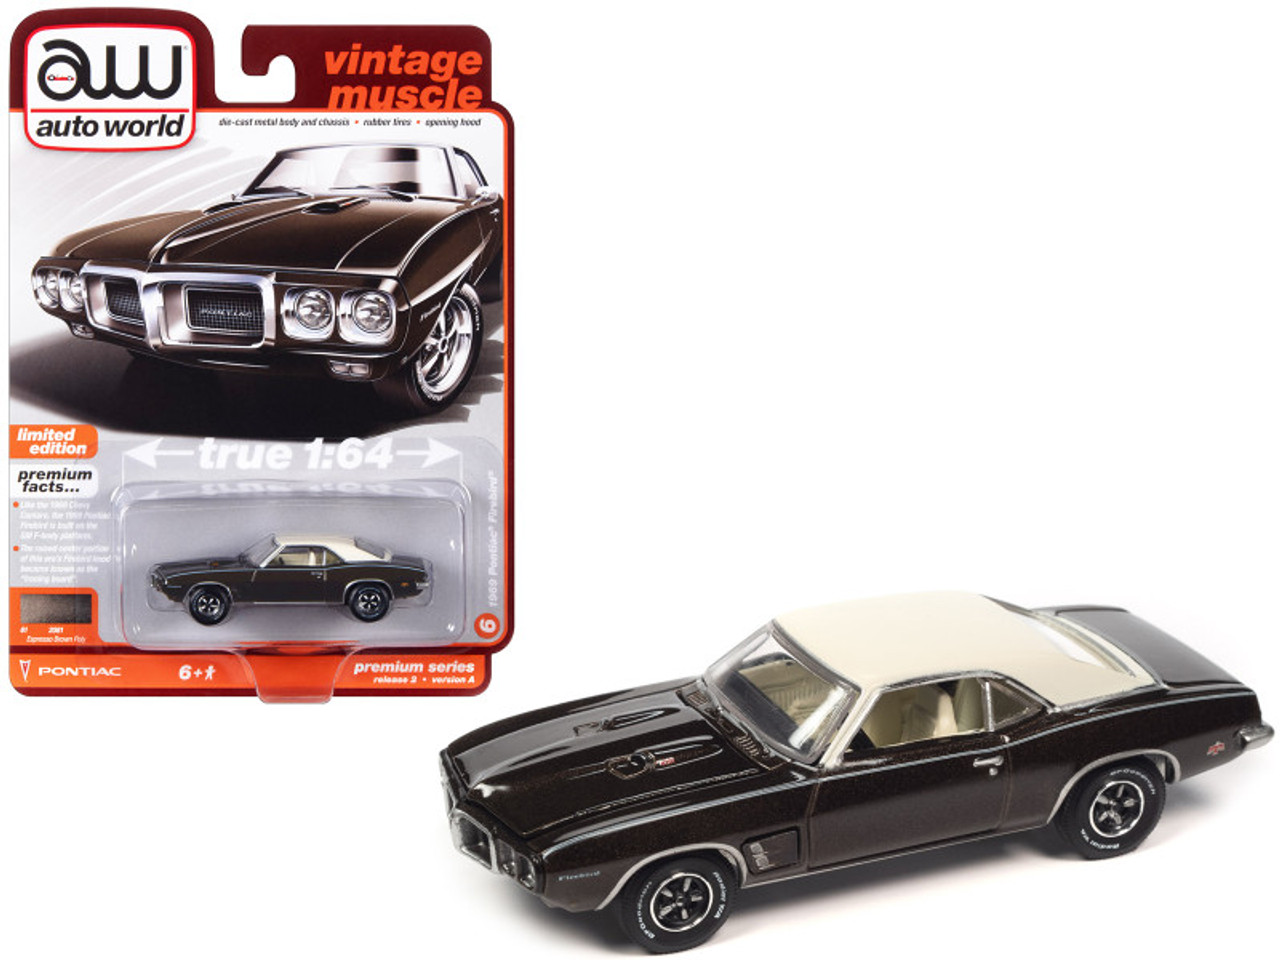 1969 Pontiac Firebird Espresso Brown Metallic with White Top "Vintage Muscle" Limited Edition 1/64 Diecast Model Car by Auto World